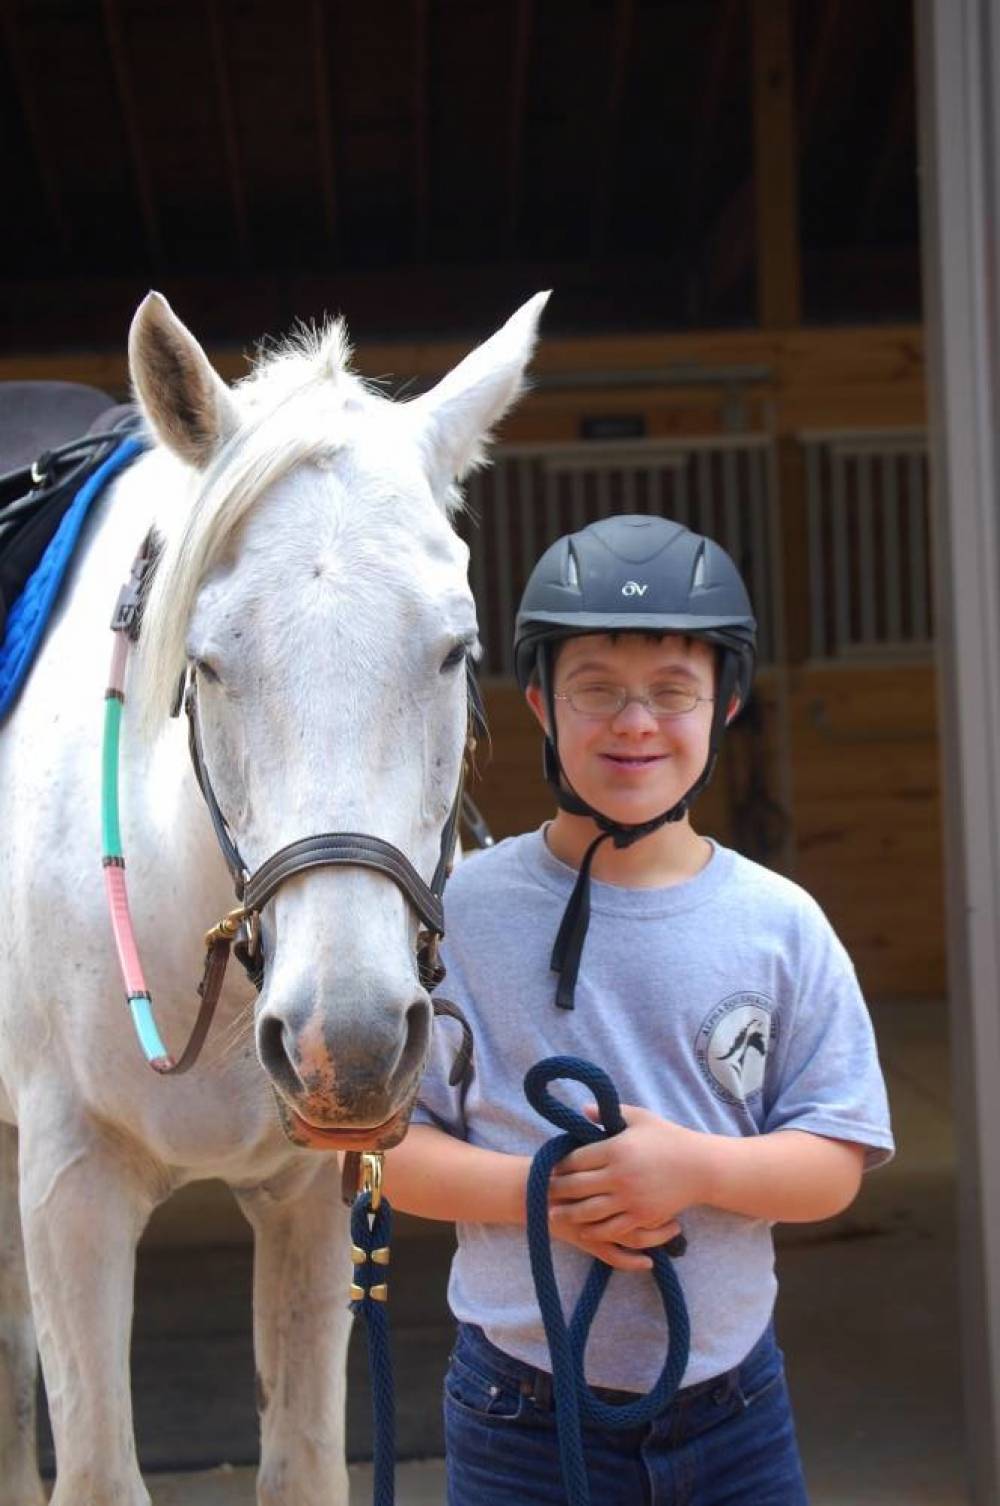 TOP GEORGIA HORSE RIDING CAMP: Heaven s Gait Therapeutic Riding is a Top Horse Riding Summer Camp located in Woodstock Georgia offering many fun and enriching Horse Riding and other camp programs. 